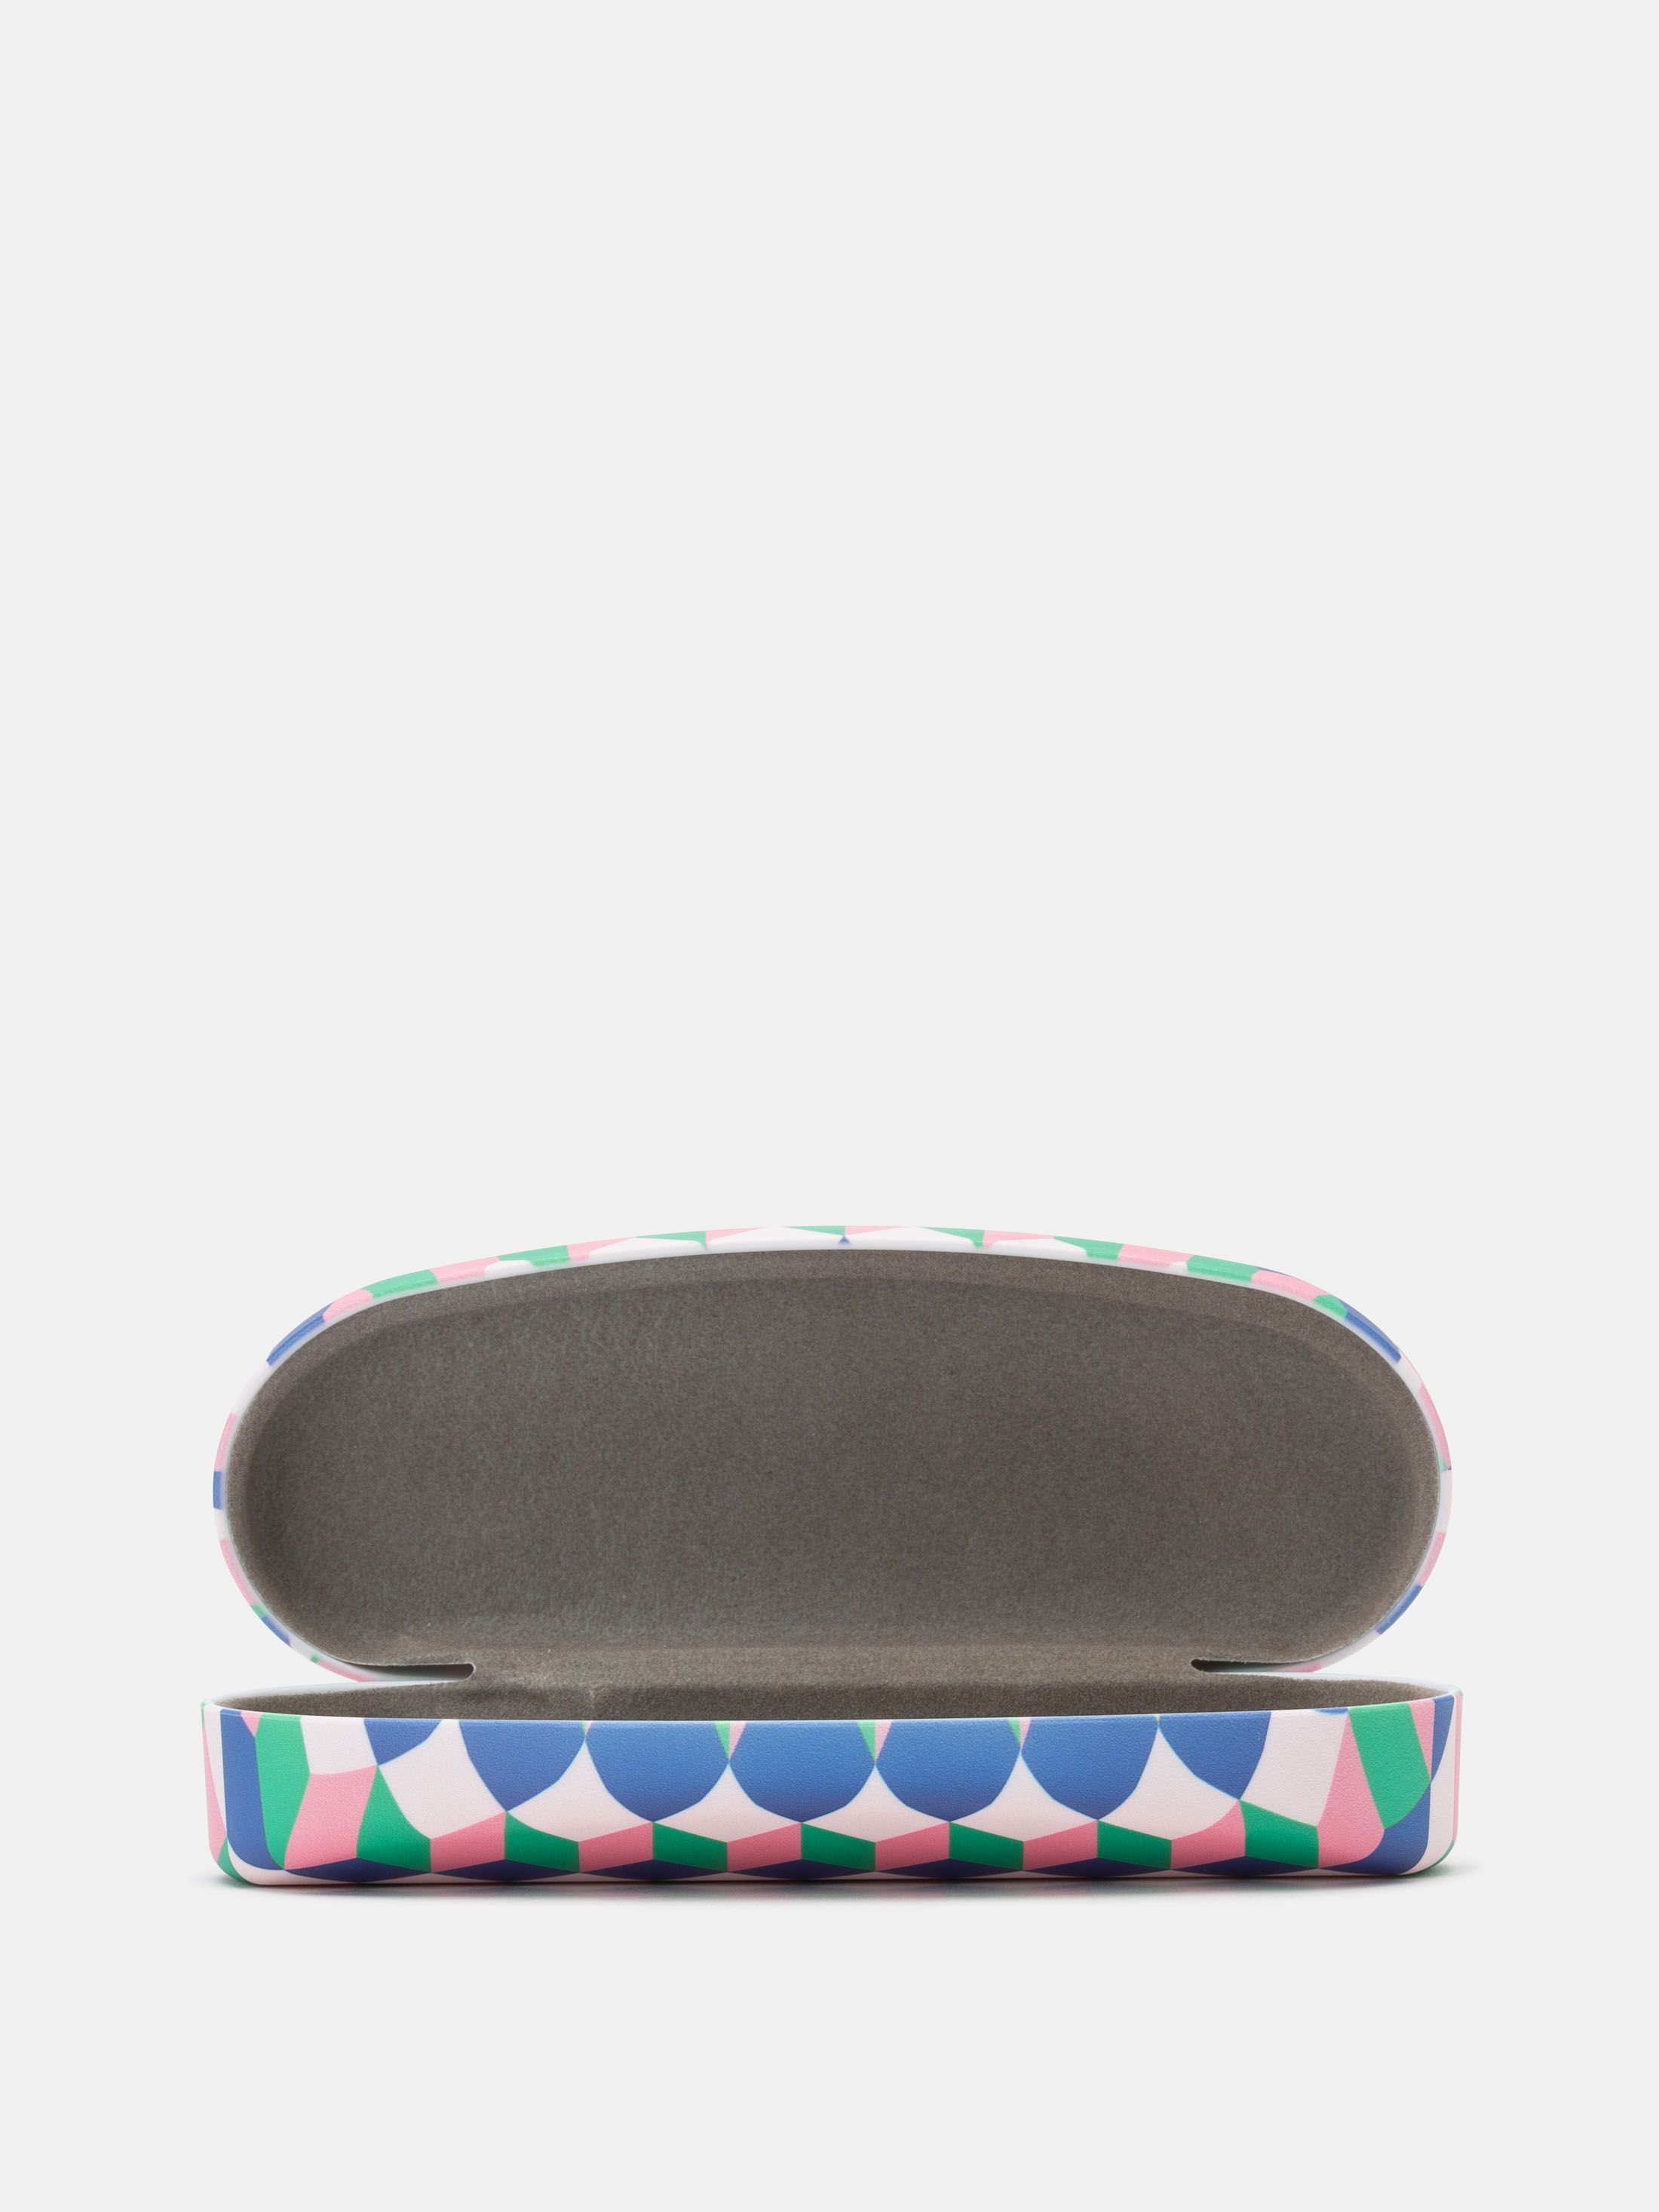 hard glasses case is UK made and printed with rose design